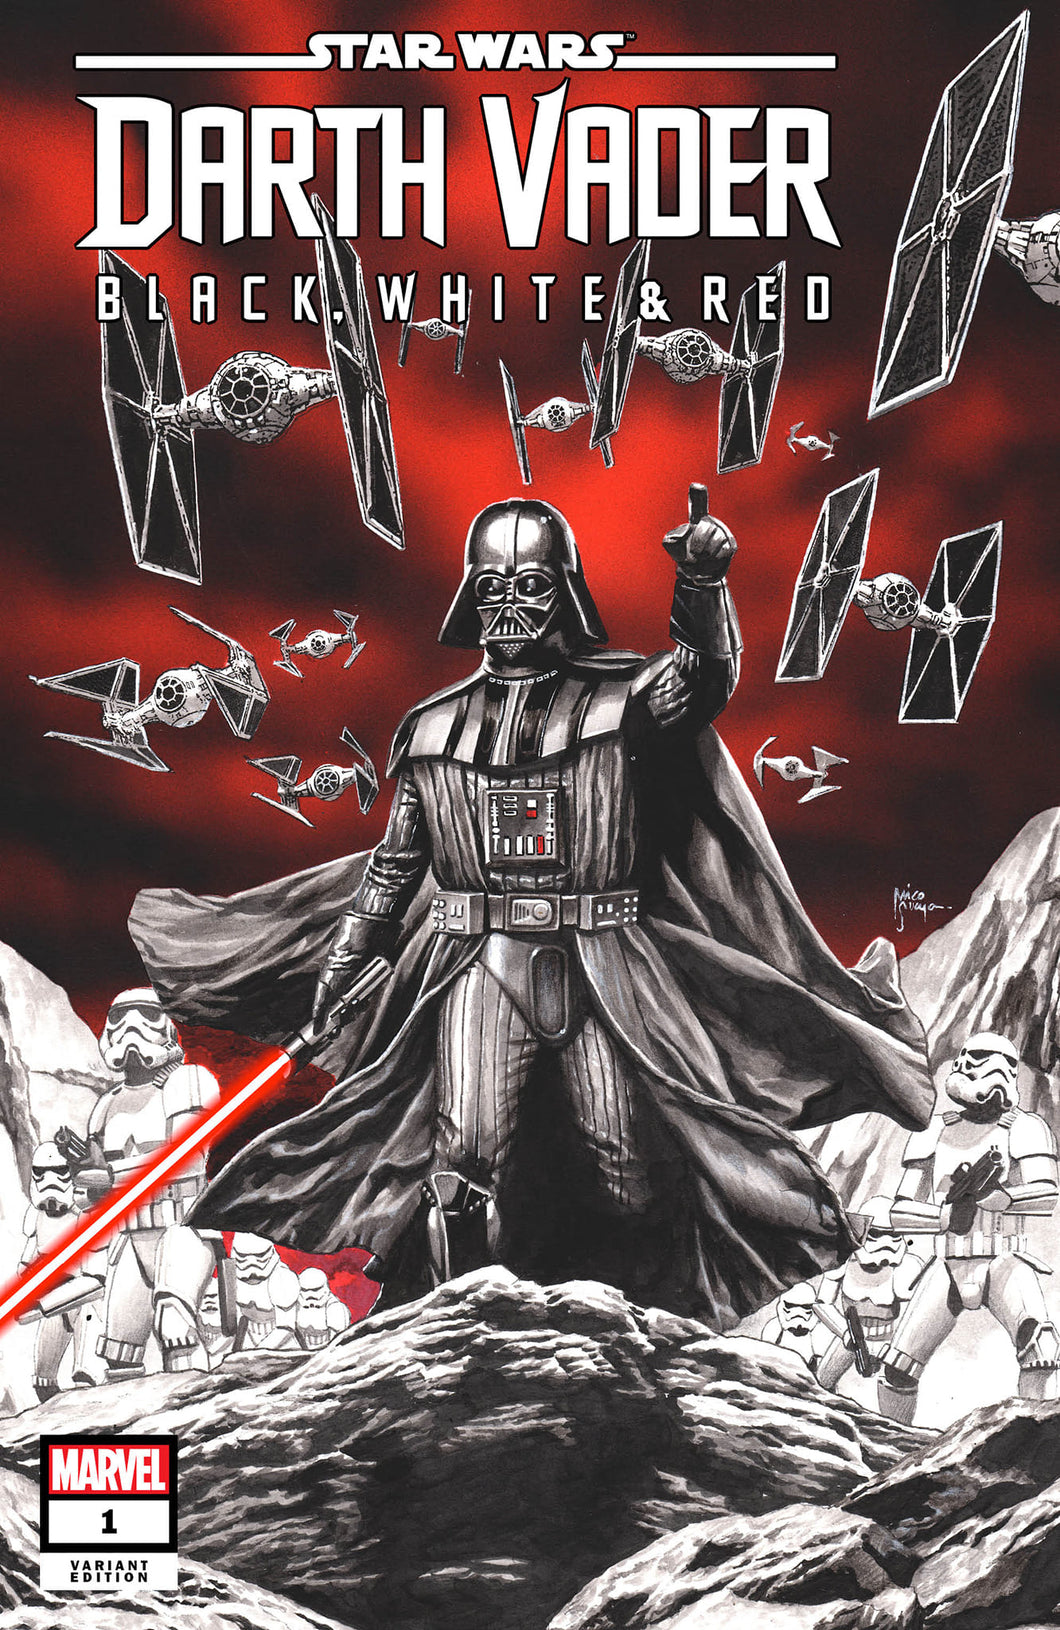 STAR WARS ~ DARTH VADER: BLACK, WHITE & RED #1 (MICO SUAYAN EXCLUSIVE VARIANT)